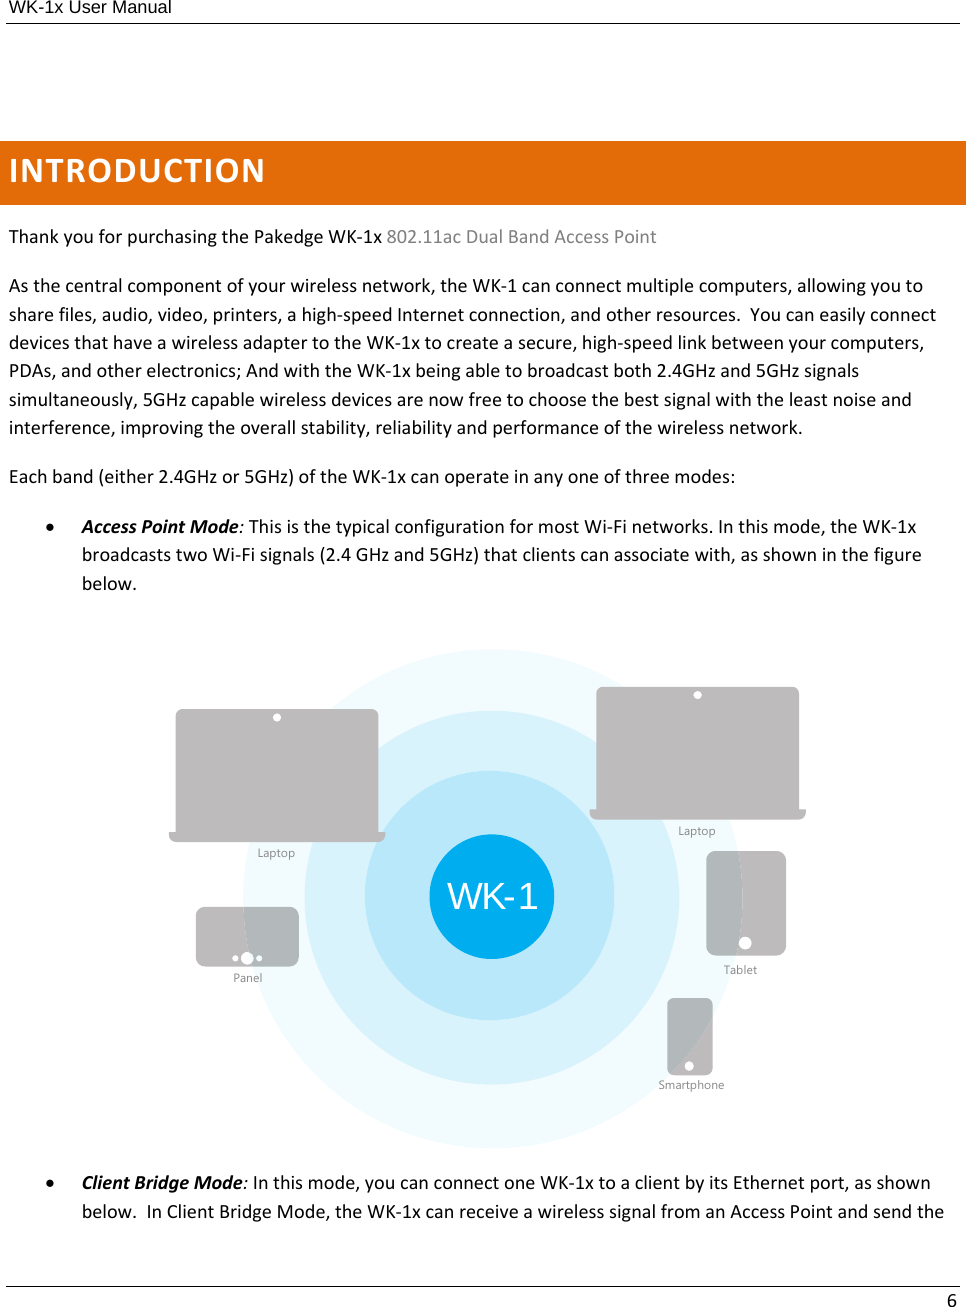 WK-1x User Manual 6INTRODUCTIONThankyouforpurchasingthePakedgeWK‐1x802.11acDualBandAccessPointAsthecentralcomponentofyourwirelessnetwork,theWK‐1canconnectmultiplecomputers,allowingyoutosharefiles,audio,video,printers,ahigh‐speedInternetconnection,andotherresources.YoucaneasilyconnectdevicesthathaveawirelessadaptertotheWK‐1xtocreateasecure,high‐speedlinkbetweenyourcomputers,PDAs,andotherelectronics;AndwiththeWK‐1xbeingabletobroadcastboth2.4GHzand5GHzsignalssimultaneously,5GHzcapablewirelessdevicesarenowfreetochoosethebestsignalwiththeleastnoiseandinterference,improvingtheoverallstability,reliabilityandperformanceofthewirelessnetwork.Eachband(either2.4GHzor5GHz)oftheWK‐1xcanoperateinanyoneofthreemodes: AccessPointMode:ThisisthetypicalconfigurationformostWi‐Finetworks.Inthismode,theWK‐1xbroadcaststwoWi‐Fisignals(2.4GHzand5GHz)thatclientscanassociatewith,asshowninthefigurebelow. ClientBridgeMode:Inthismode,youcanconnectoneWK‐1xtoaclientbyitsEthernetport,asshownbelow.InClientBridgeMode,theWK‐1xcanreceiveawirelesssignalfromanAccessPointandsendtheWK-1LaptopLaptopTabletSmartphonePanel